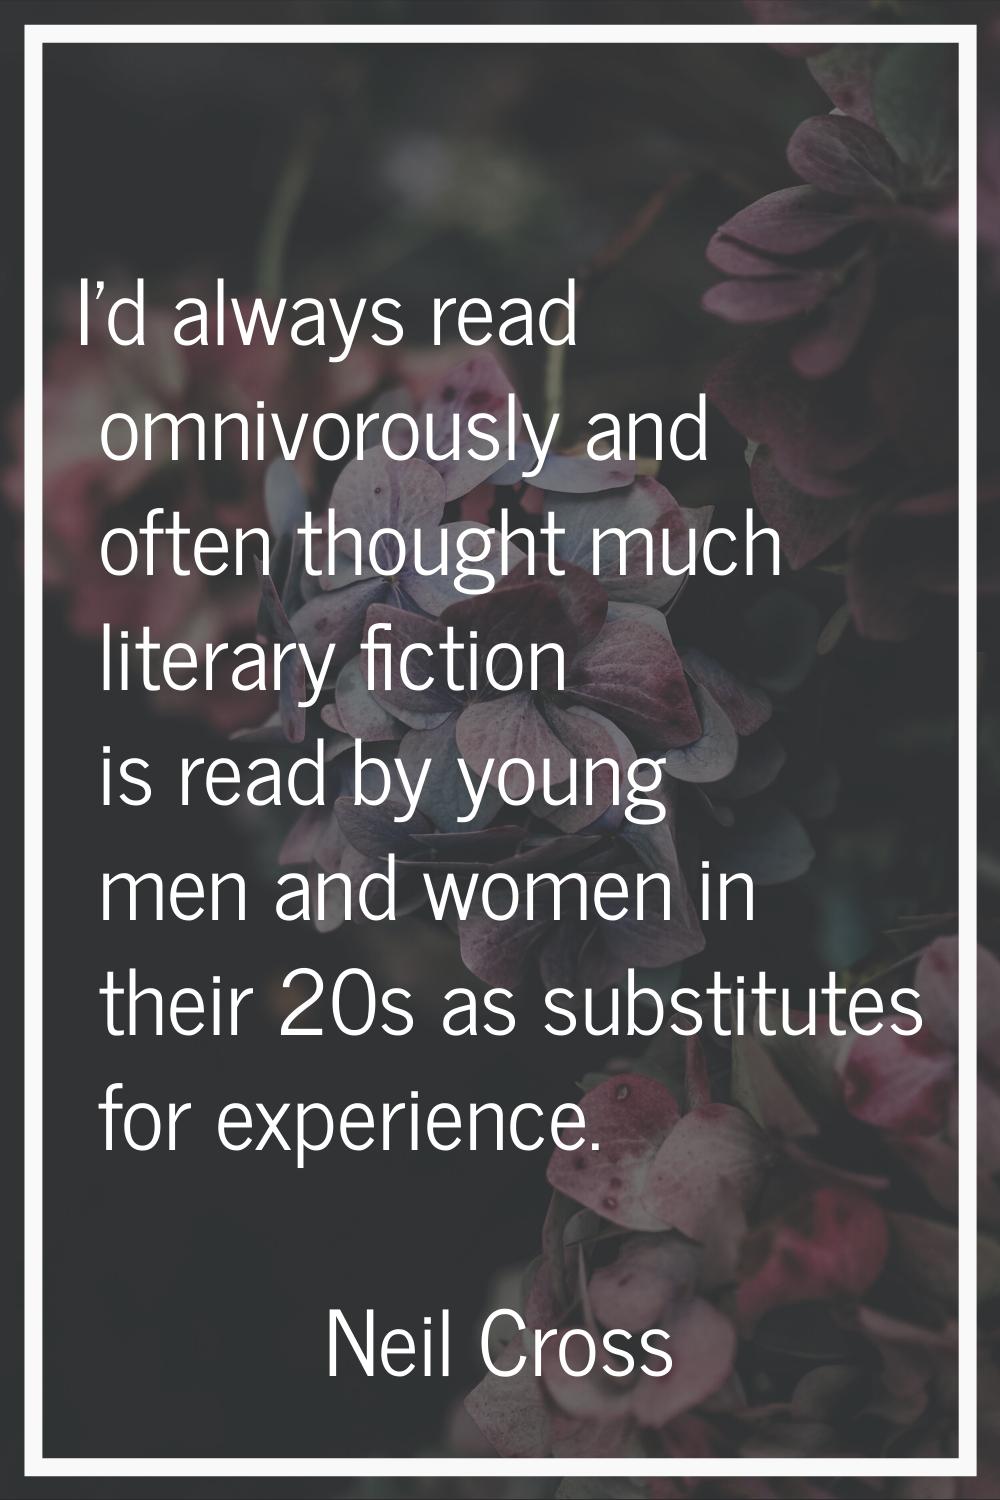 I'd always read omnivorously and often thought much literary fiction is read by young men and women